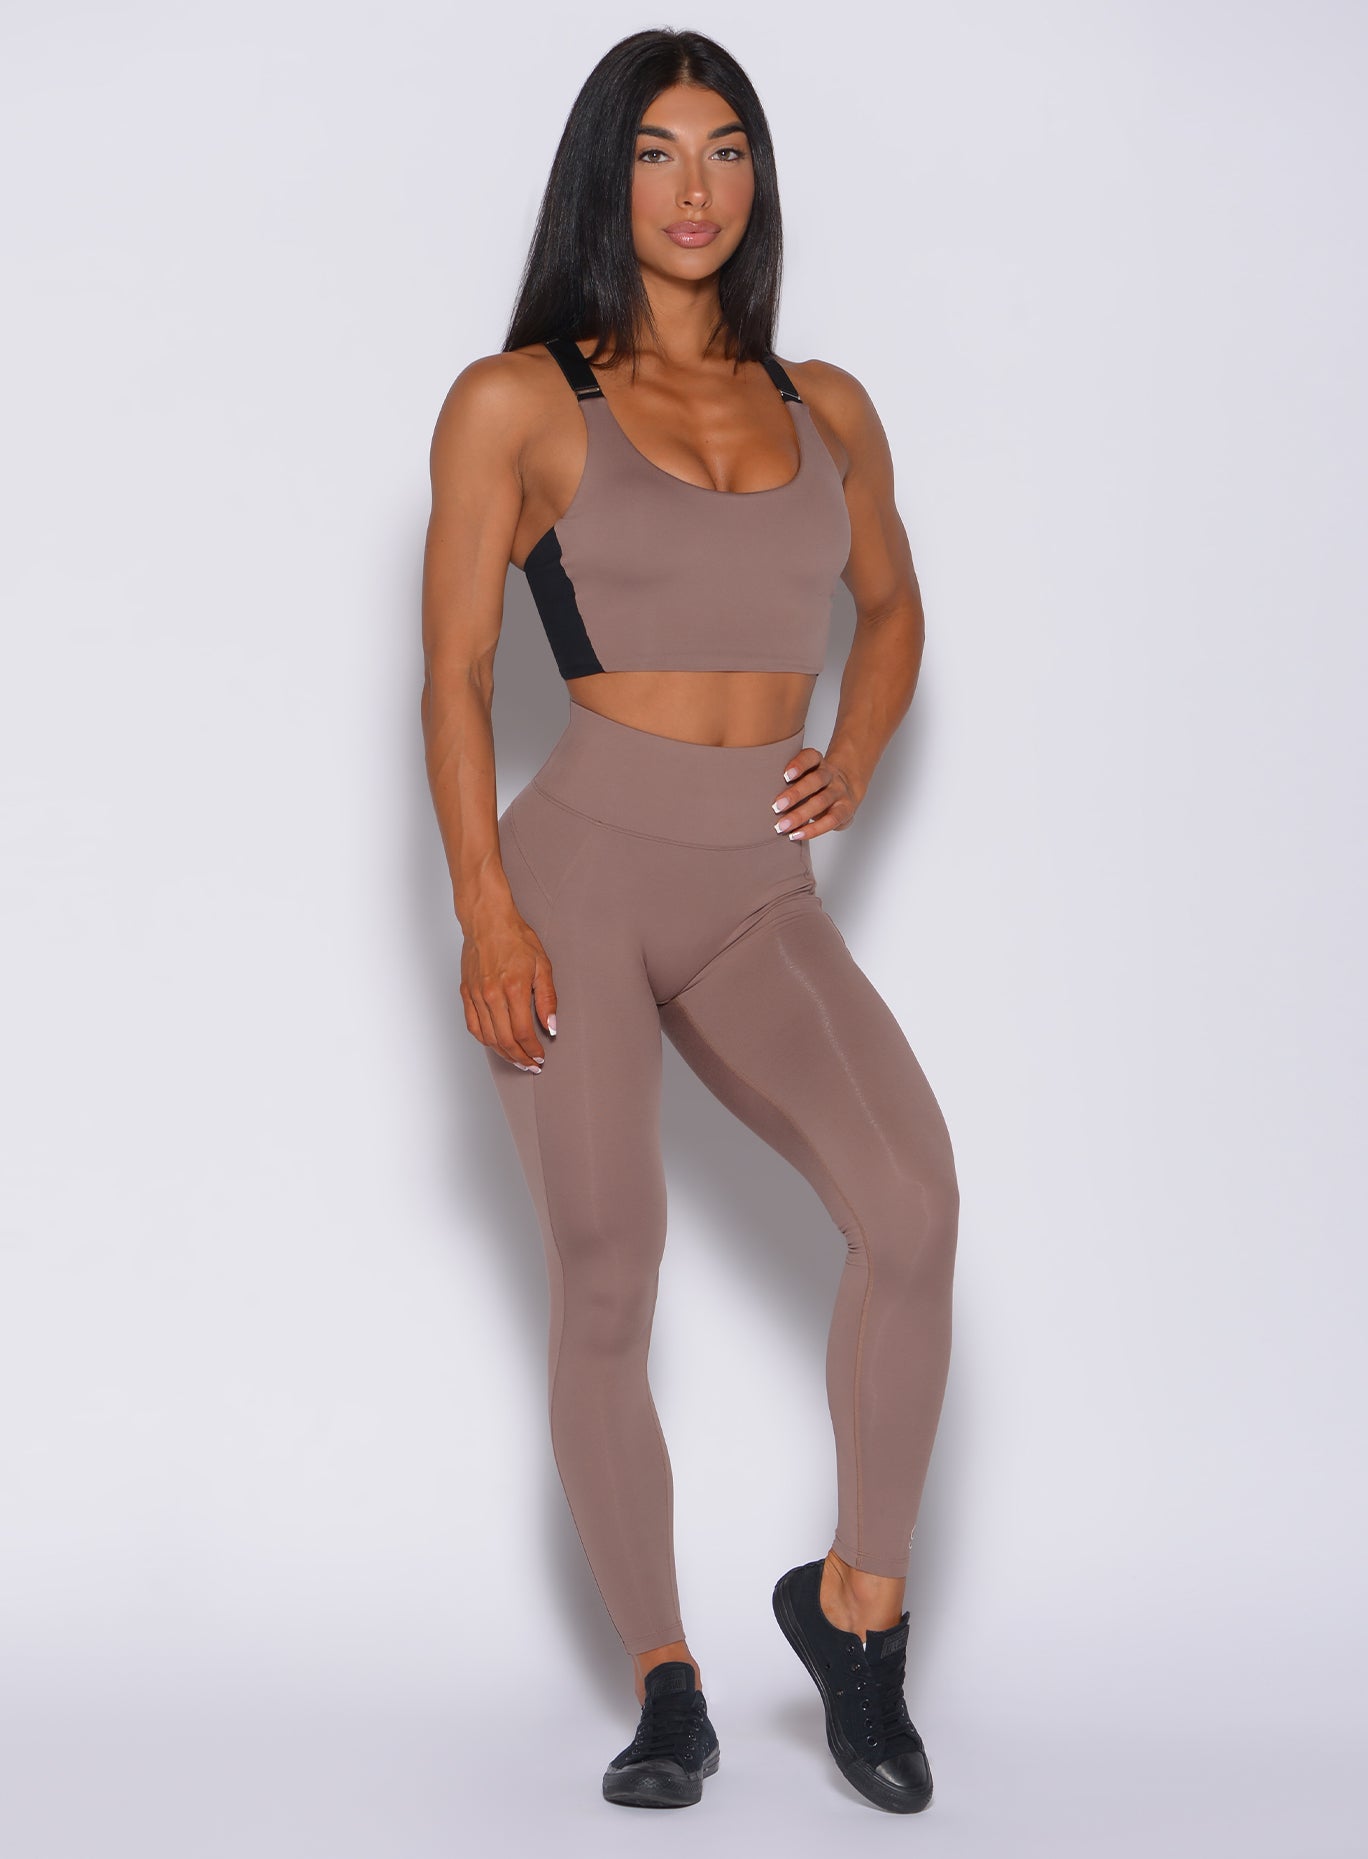 Front profile view of a model  with her left hand on waist wearing our snatched waist leggings in cocoa color and a matching bra 